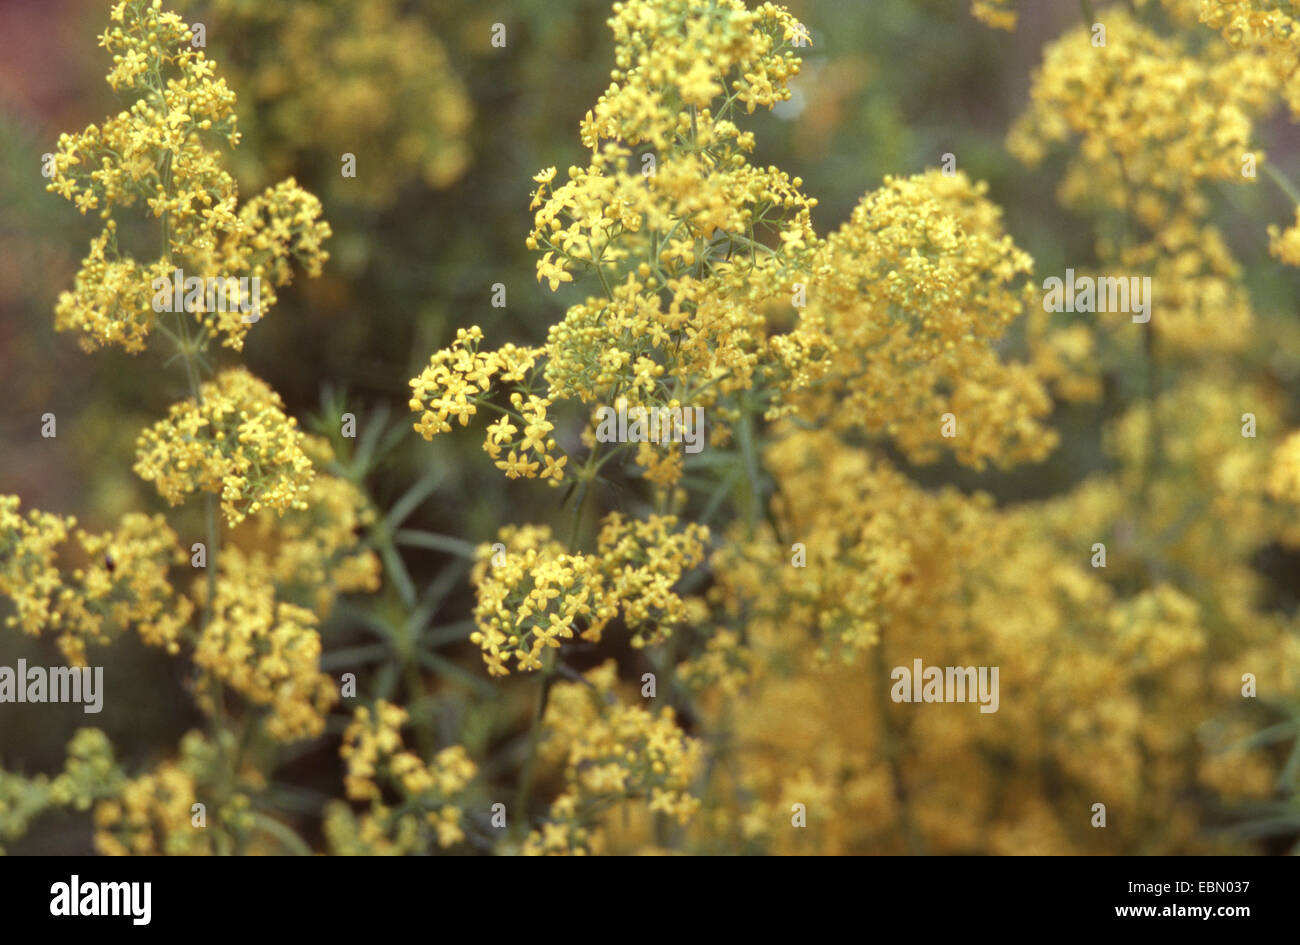 Galium verum subsp. verum (Galium verum subsp. verum), blooming, Germany Stock Photo